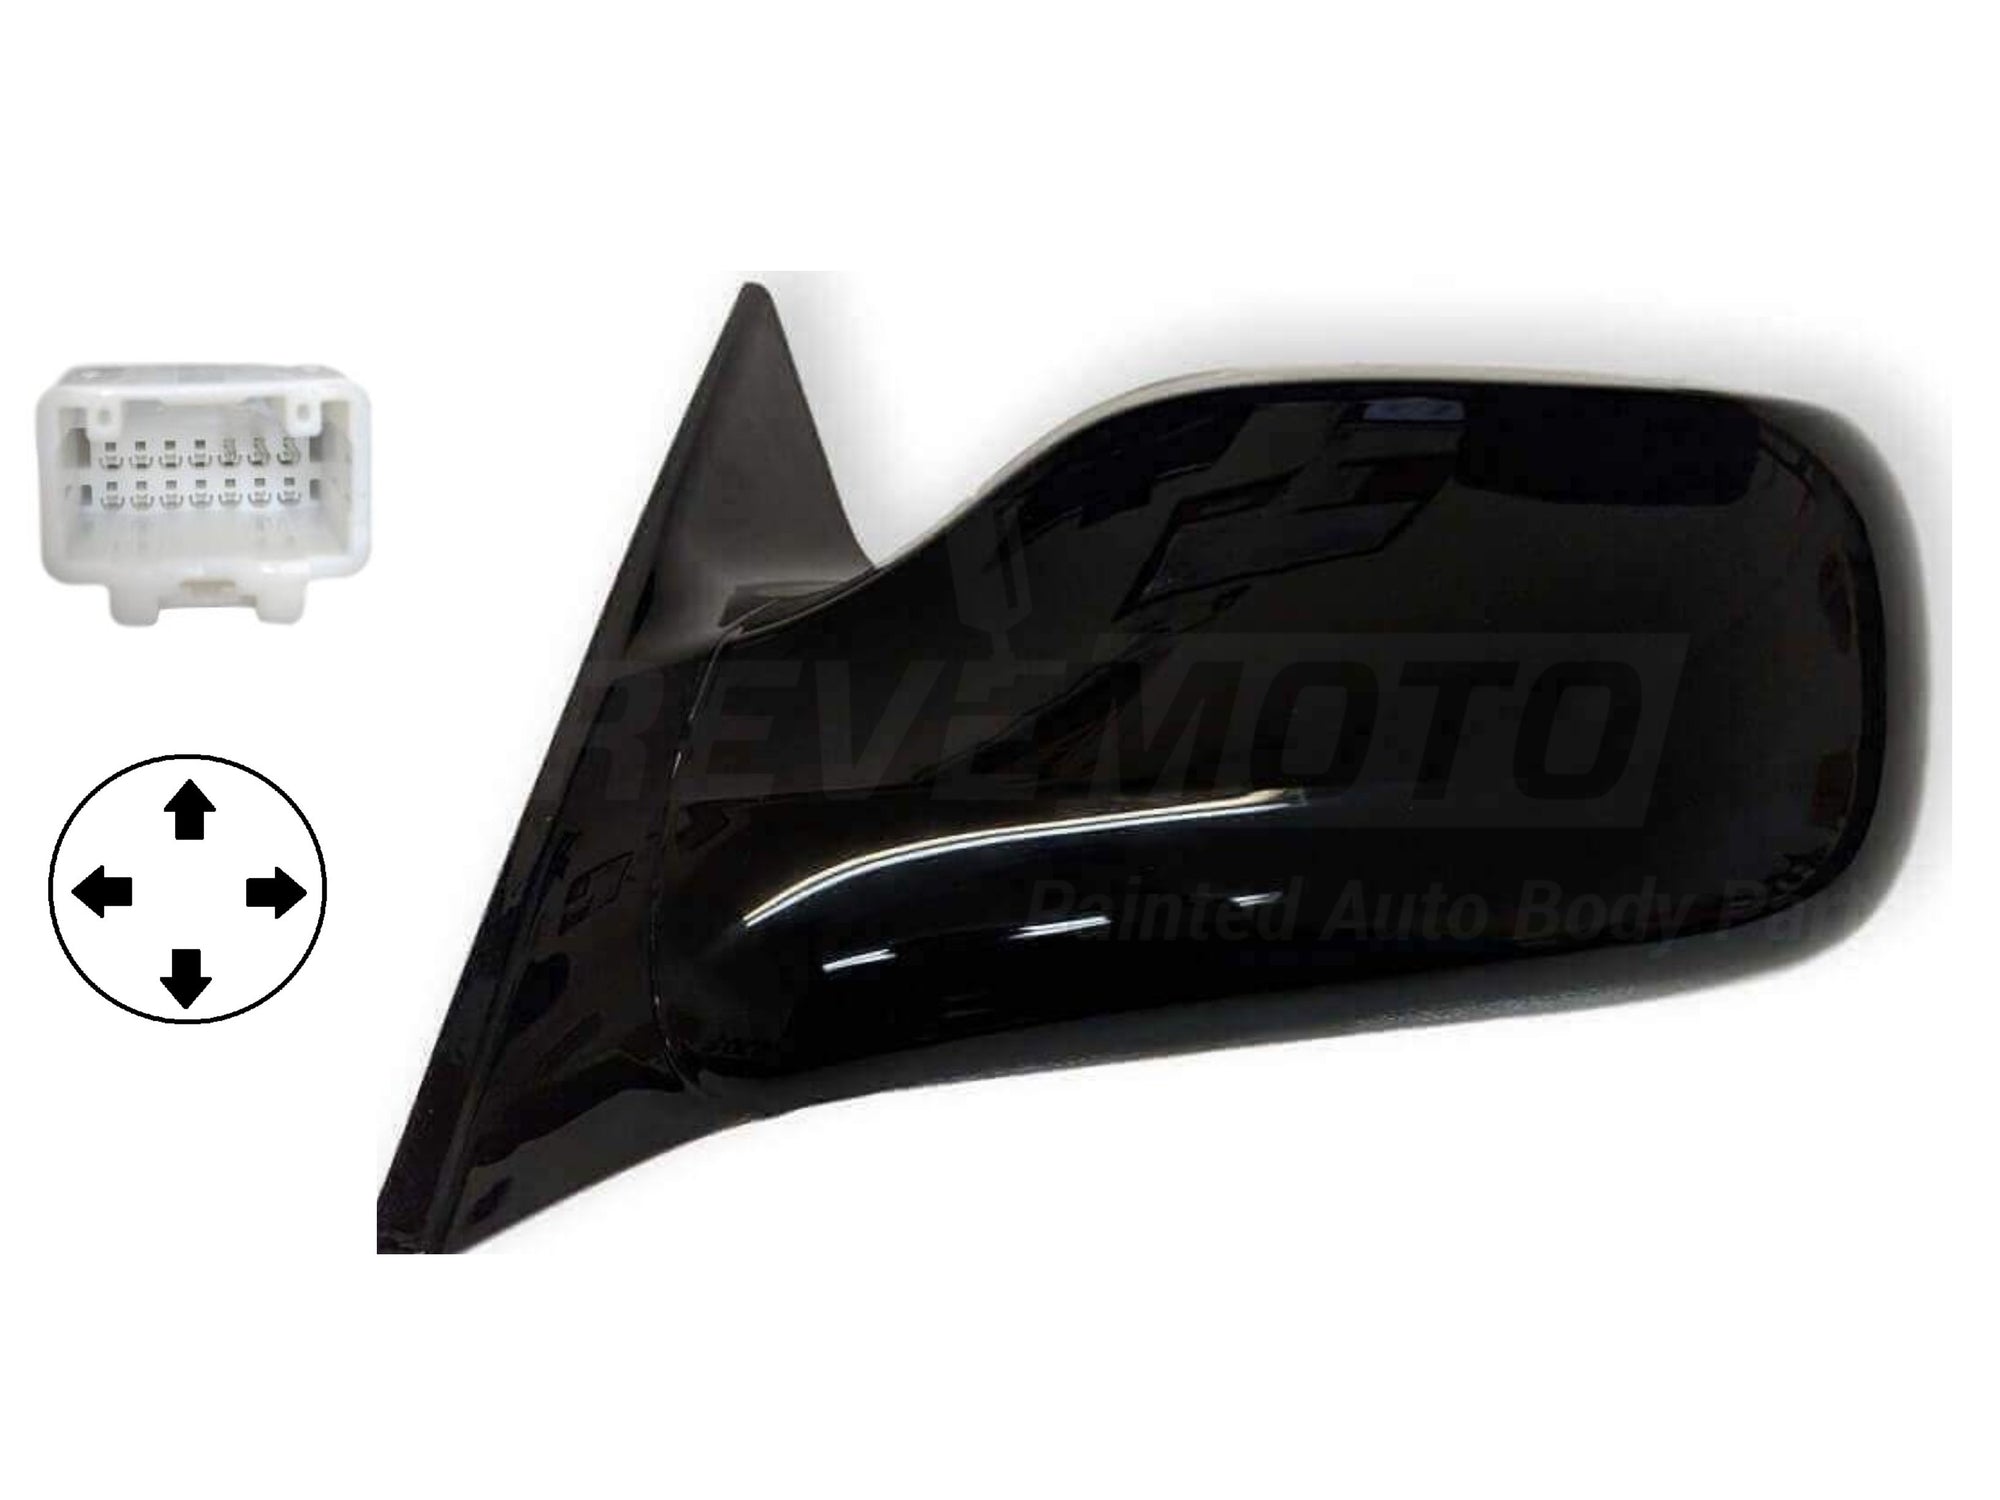 2008 Toyota Avalon Driver Side View Mirror Touring XL Exclude Limited Power Non-Heated wo Navigation System 3Pin Connector Painted Black 202 87940AC060C0 2.jpg?v=1592204406